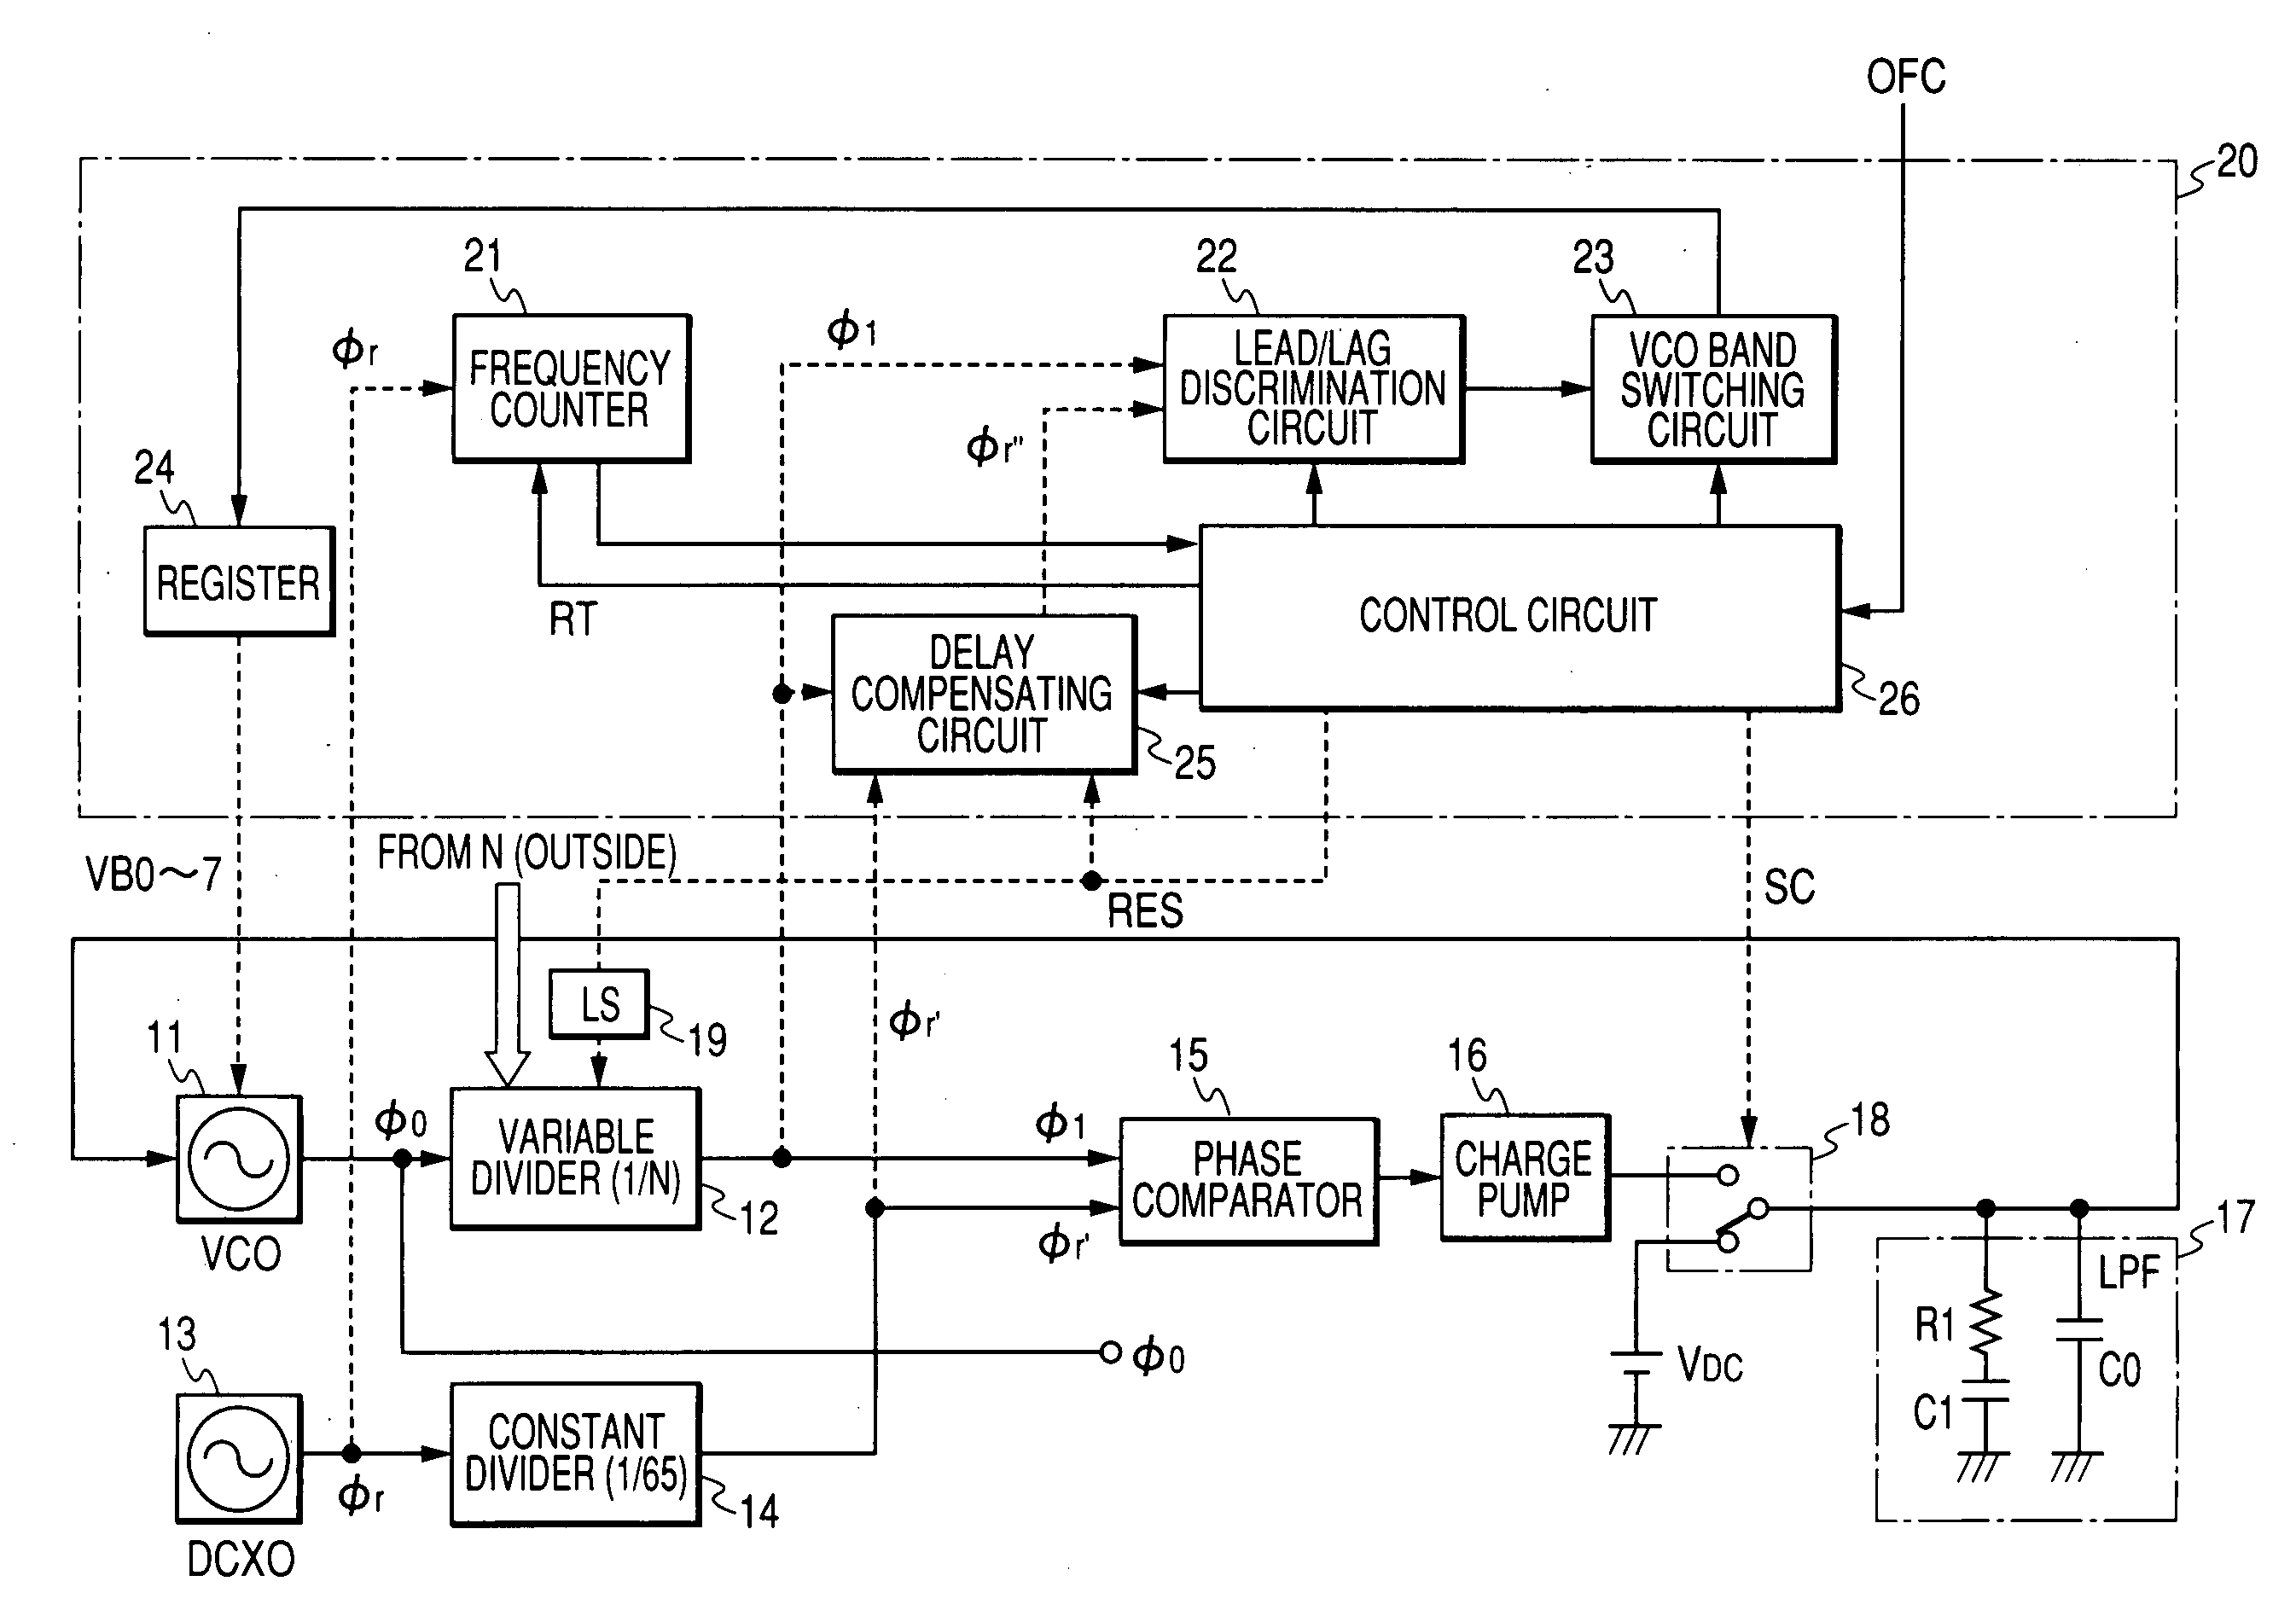 Semiconductor integrated circuit for wireless communication